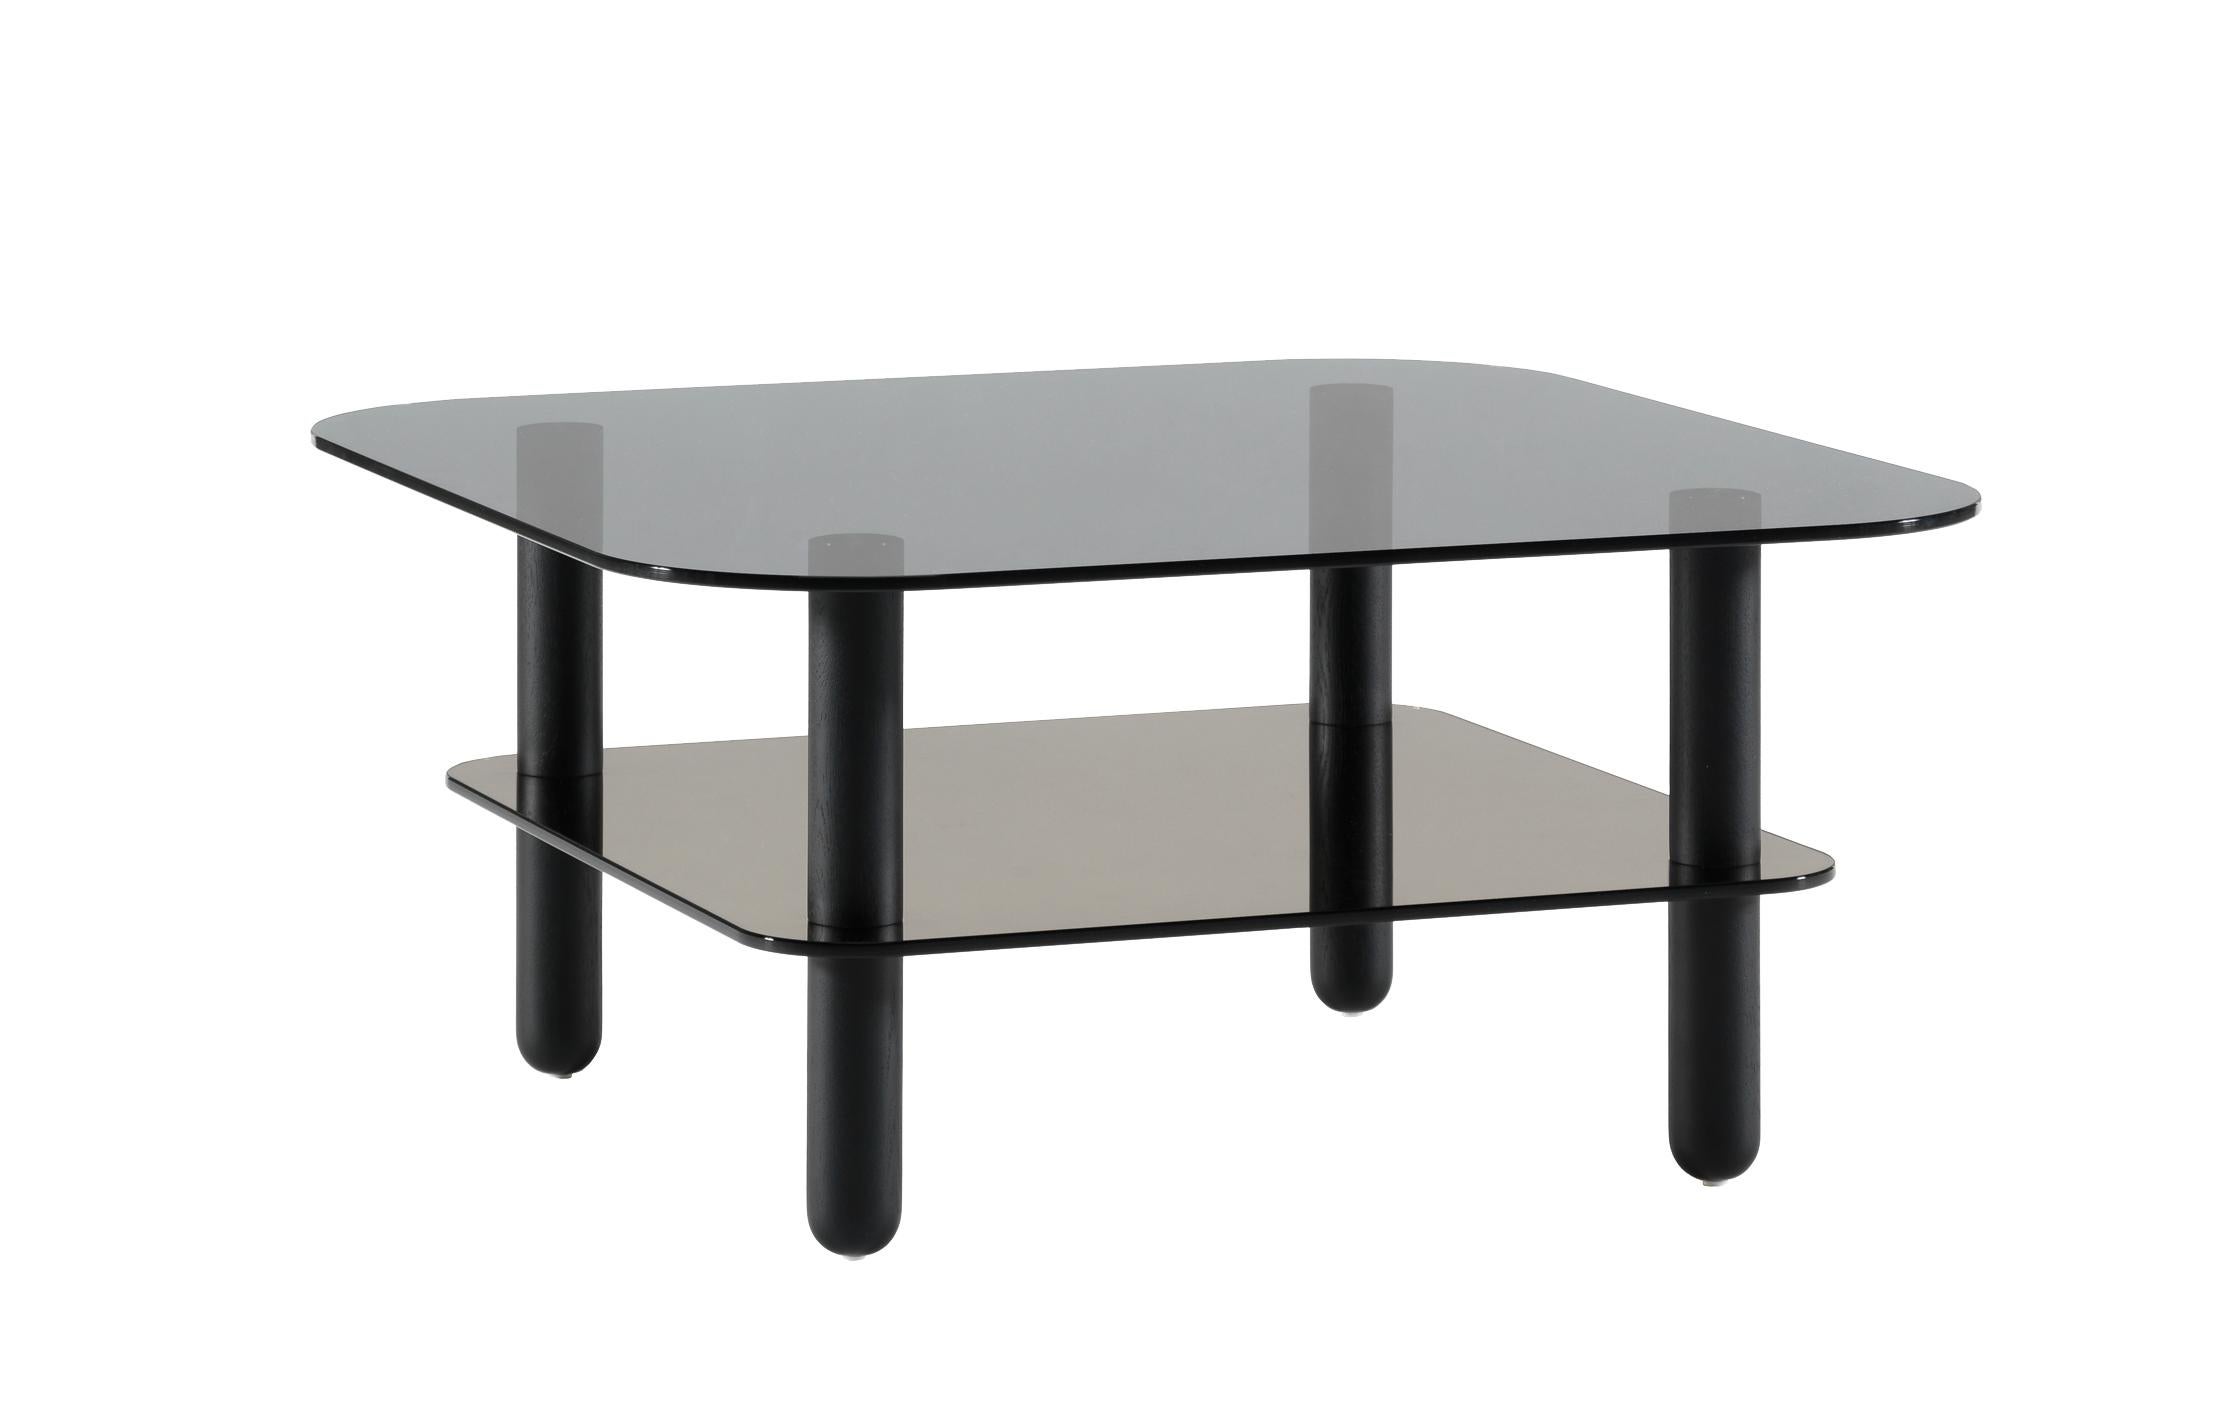 European Big Sur Sofa Table High by Fogia, Anthracite Glass , Black Legs For Sale